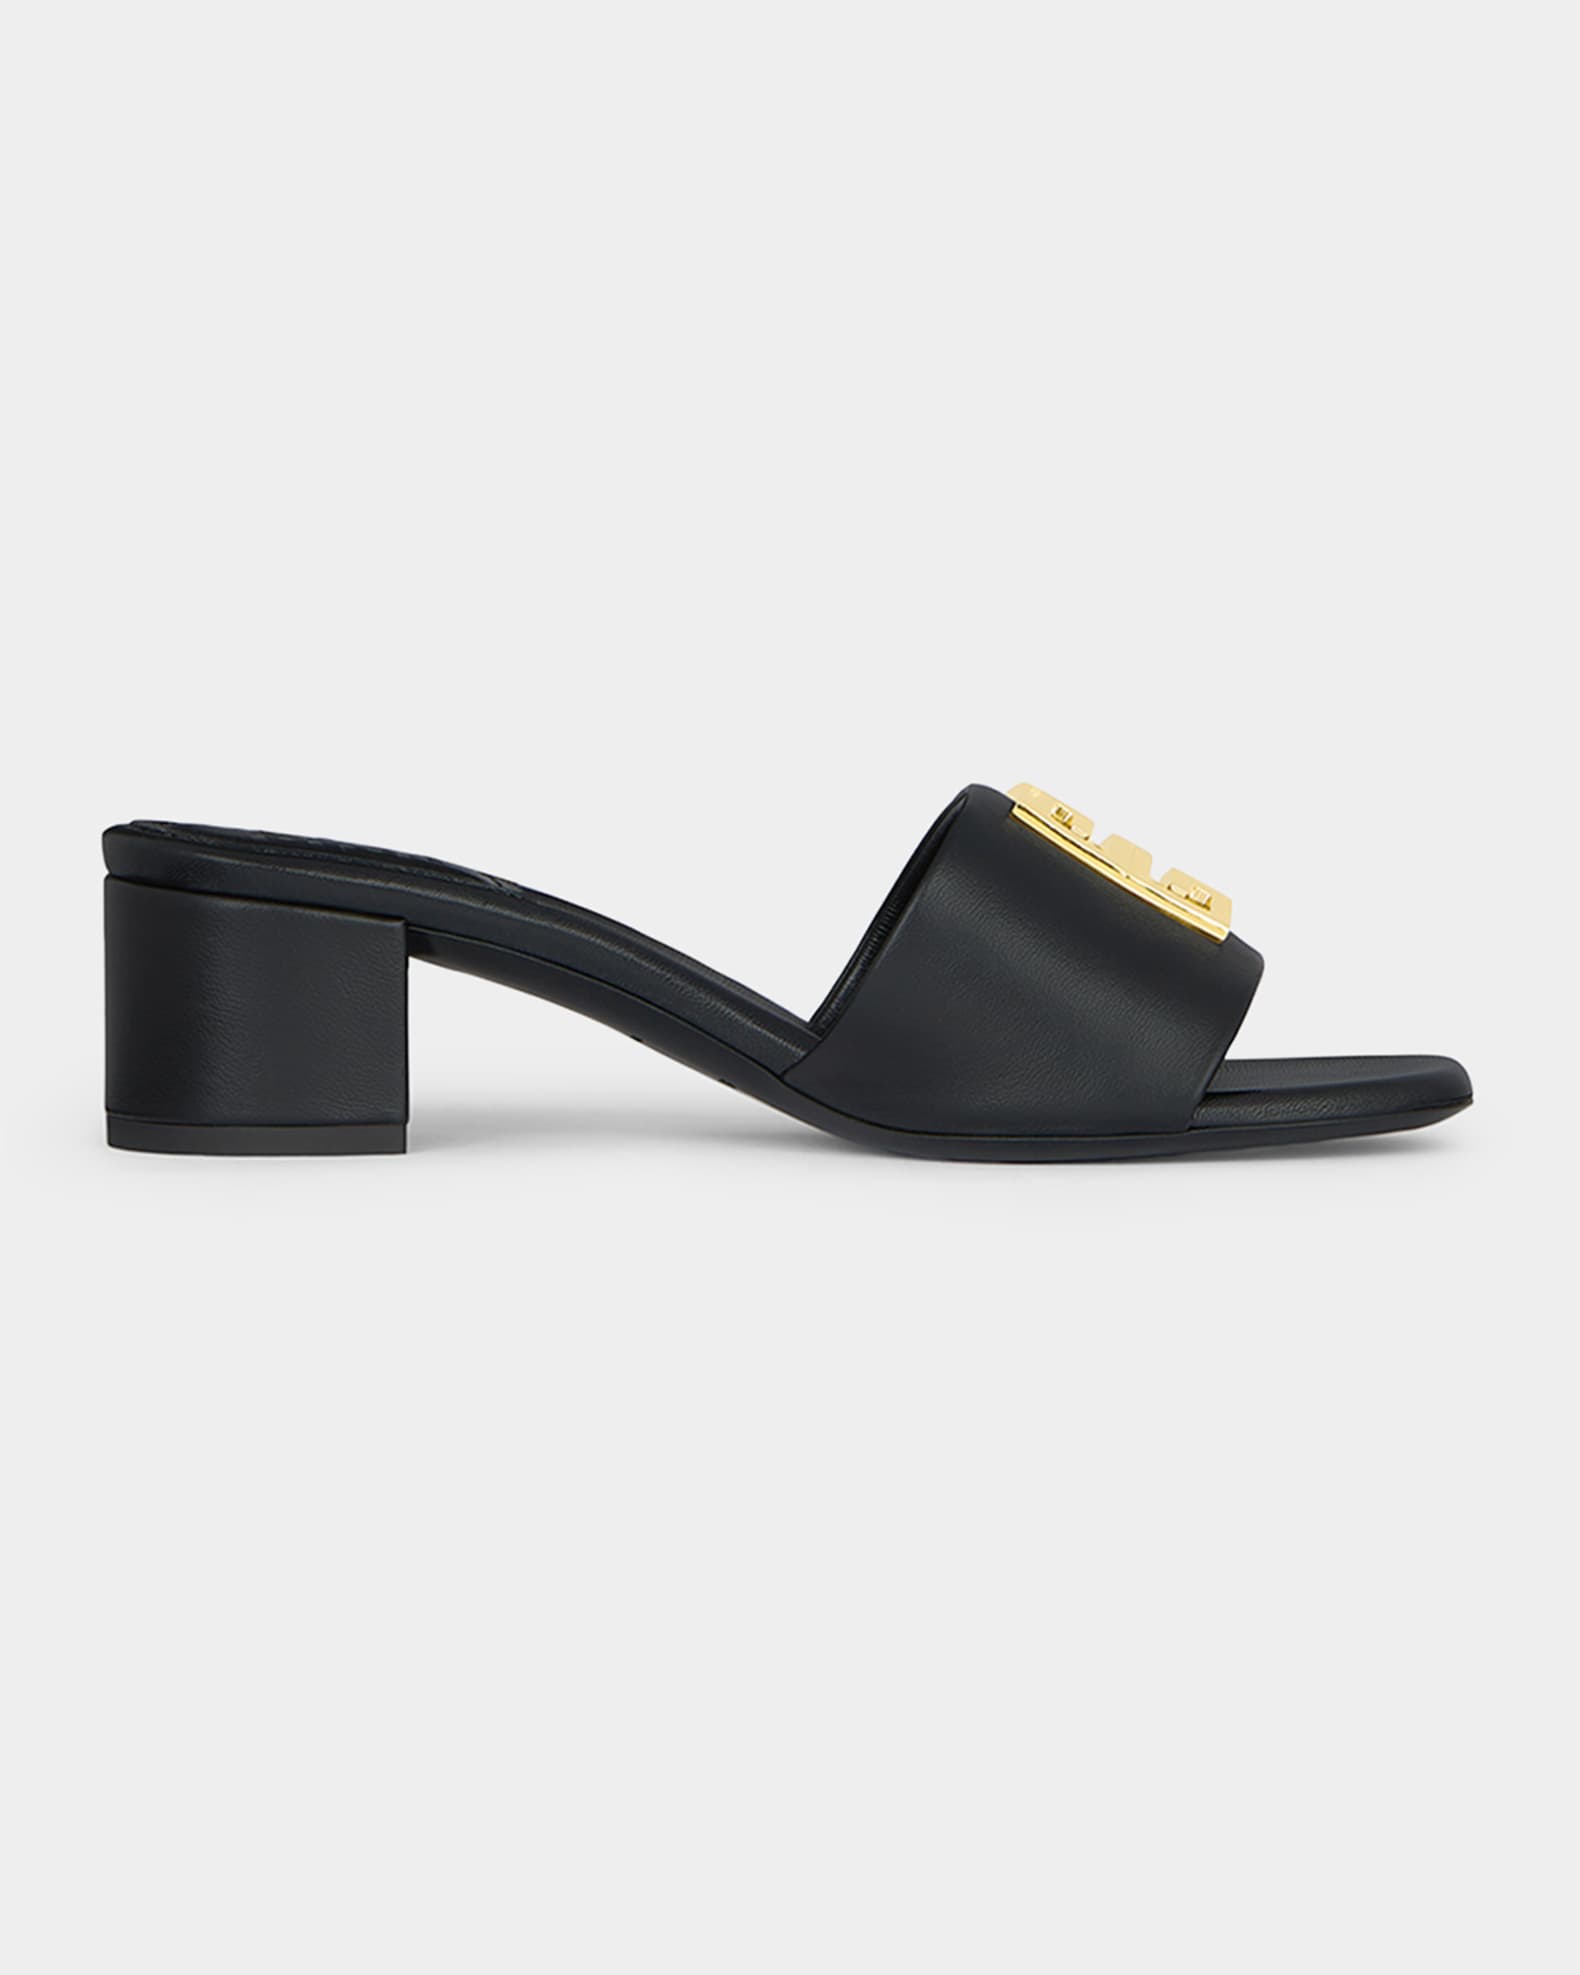 Givenchy 4G Lambskin Medallion Mule Sandals | Neiman Marcus